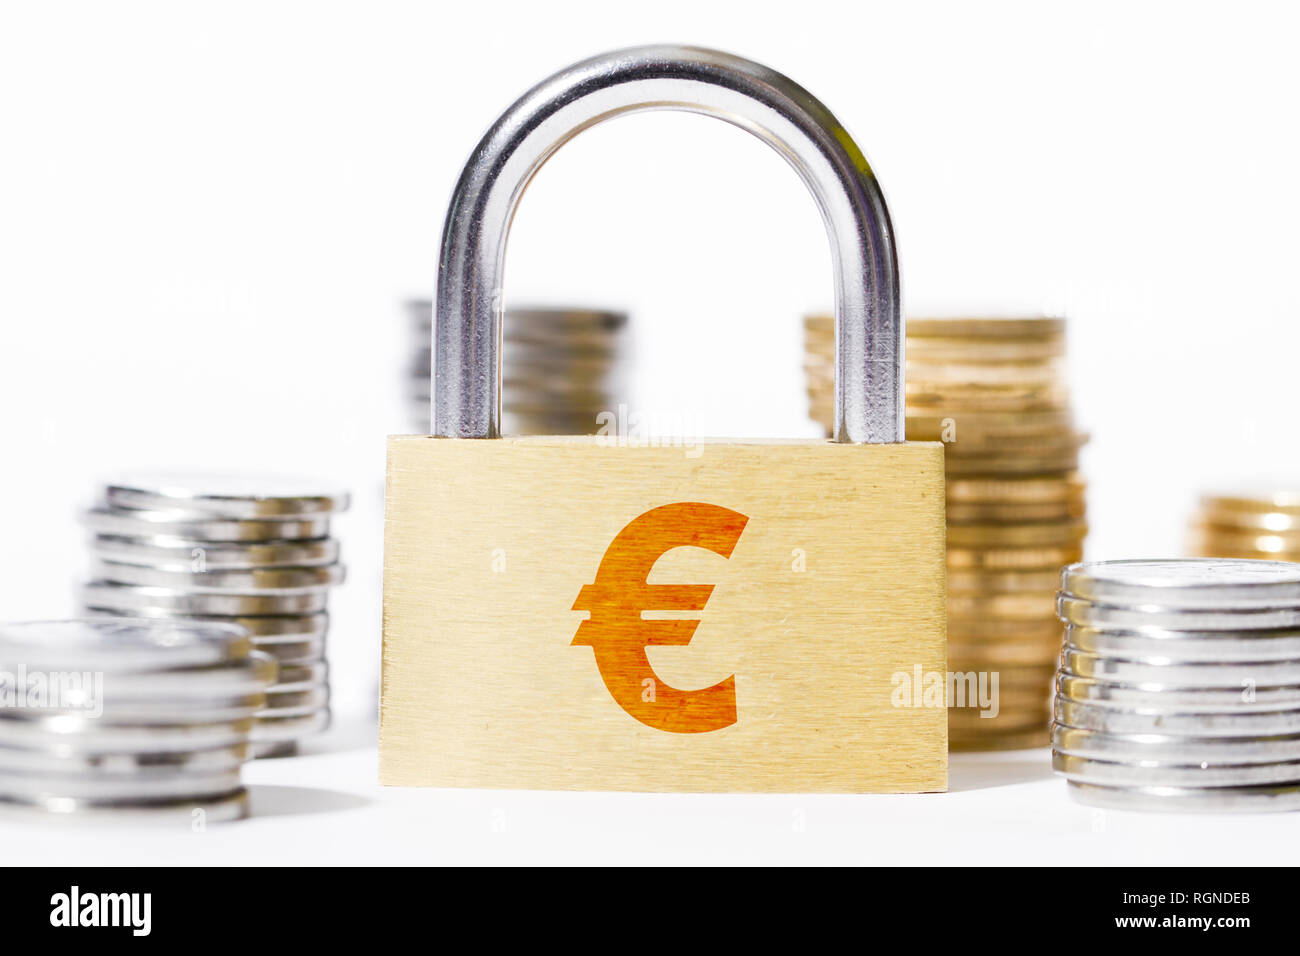 Money and Euro lock, economic security and protection Stock Photo